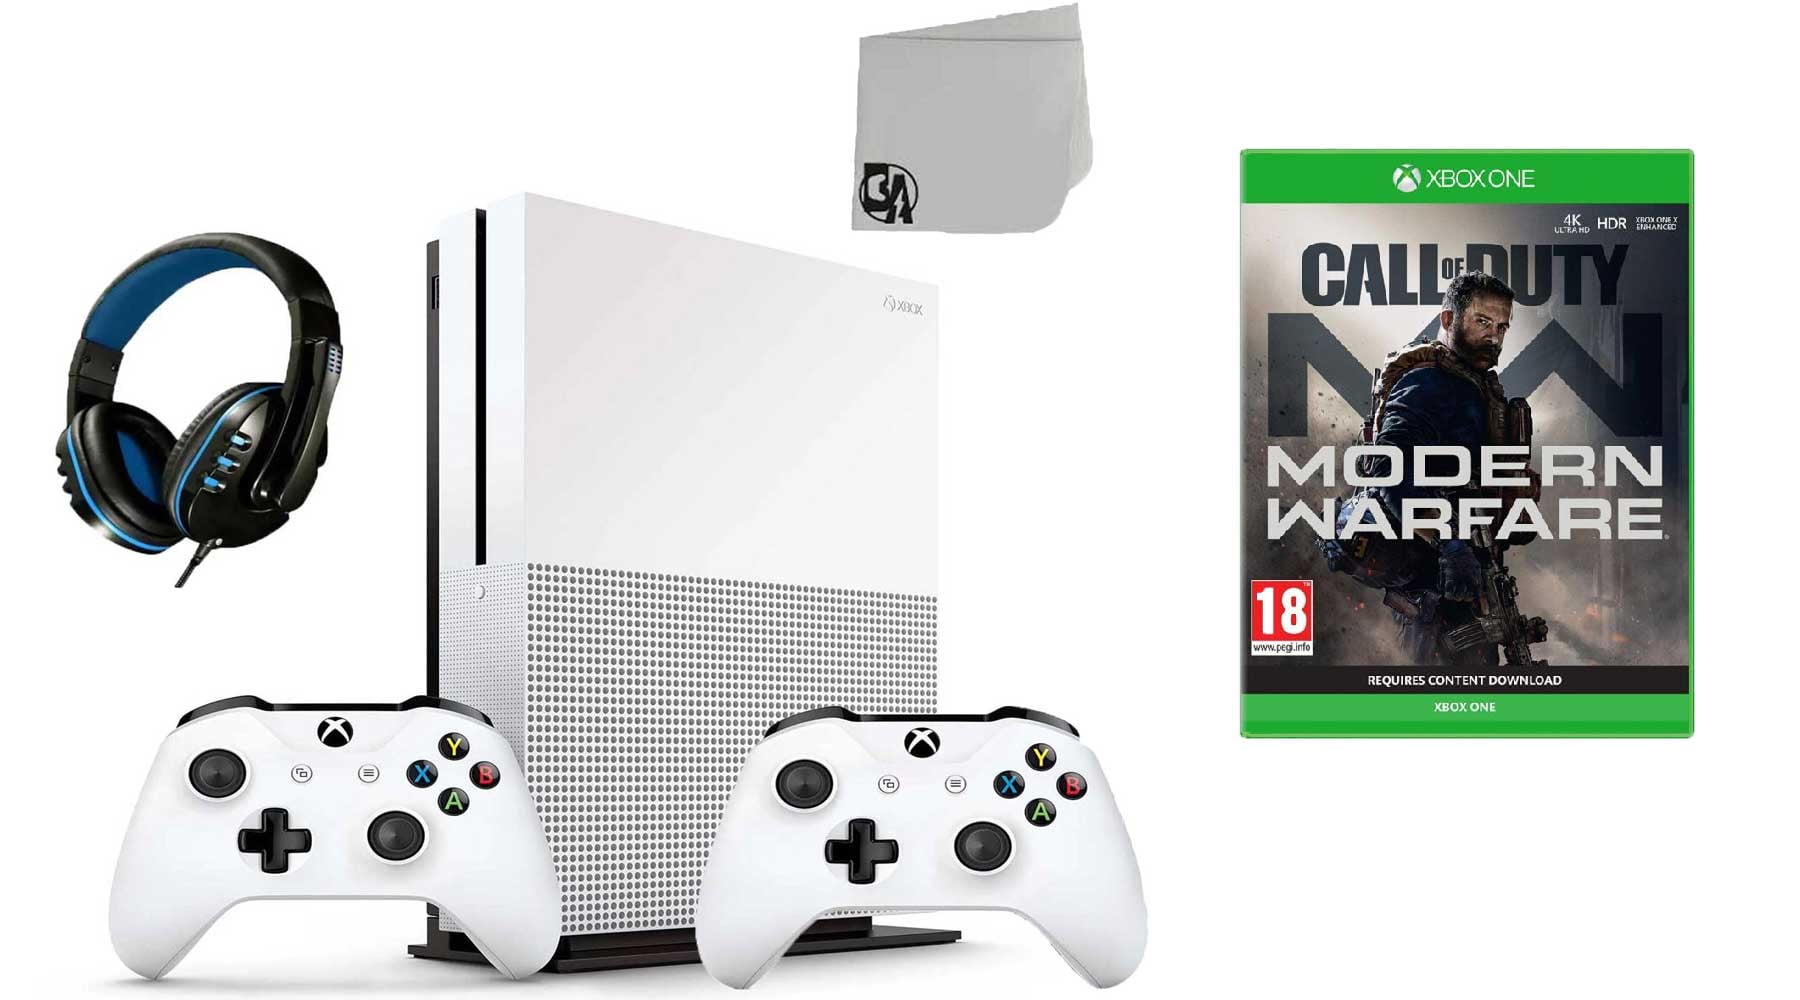 Microsoft Xbox One S Red Dead Redemption 2 Bundle: Xbox One S 1TB